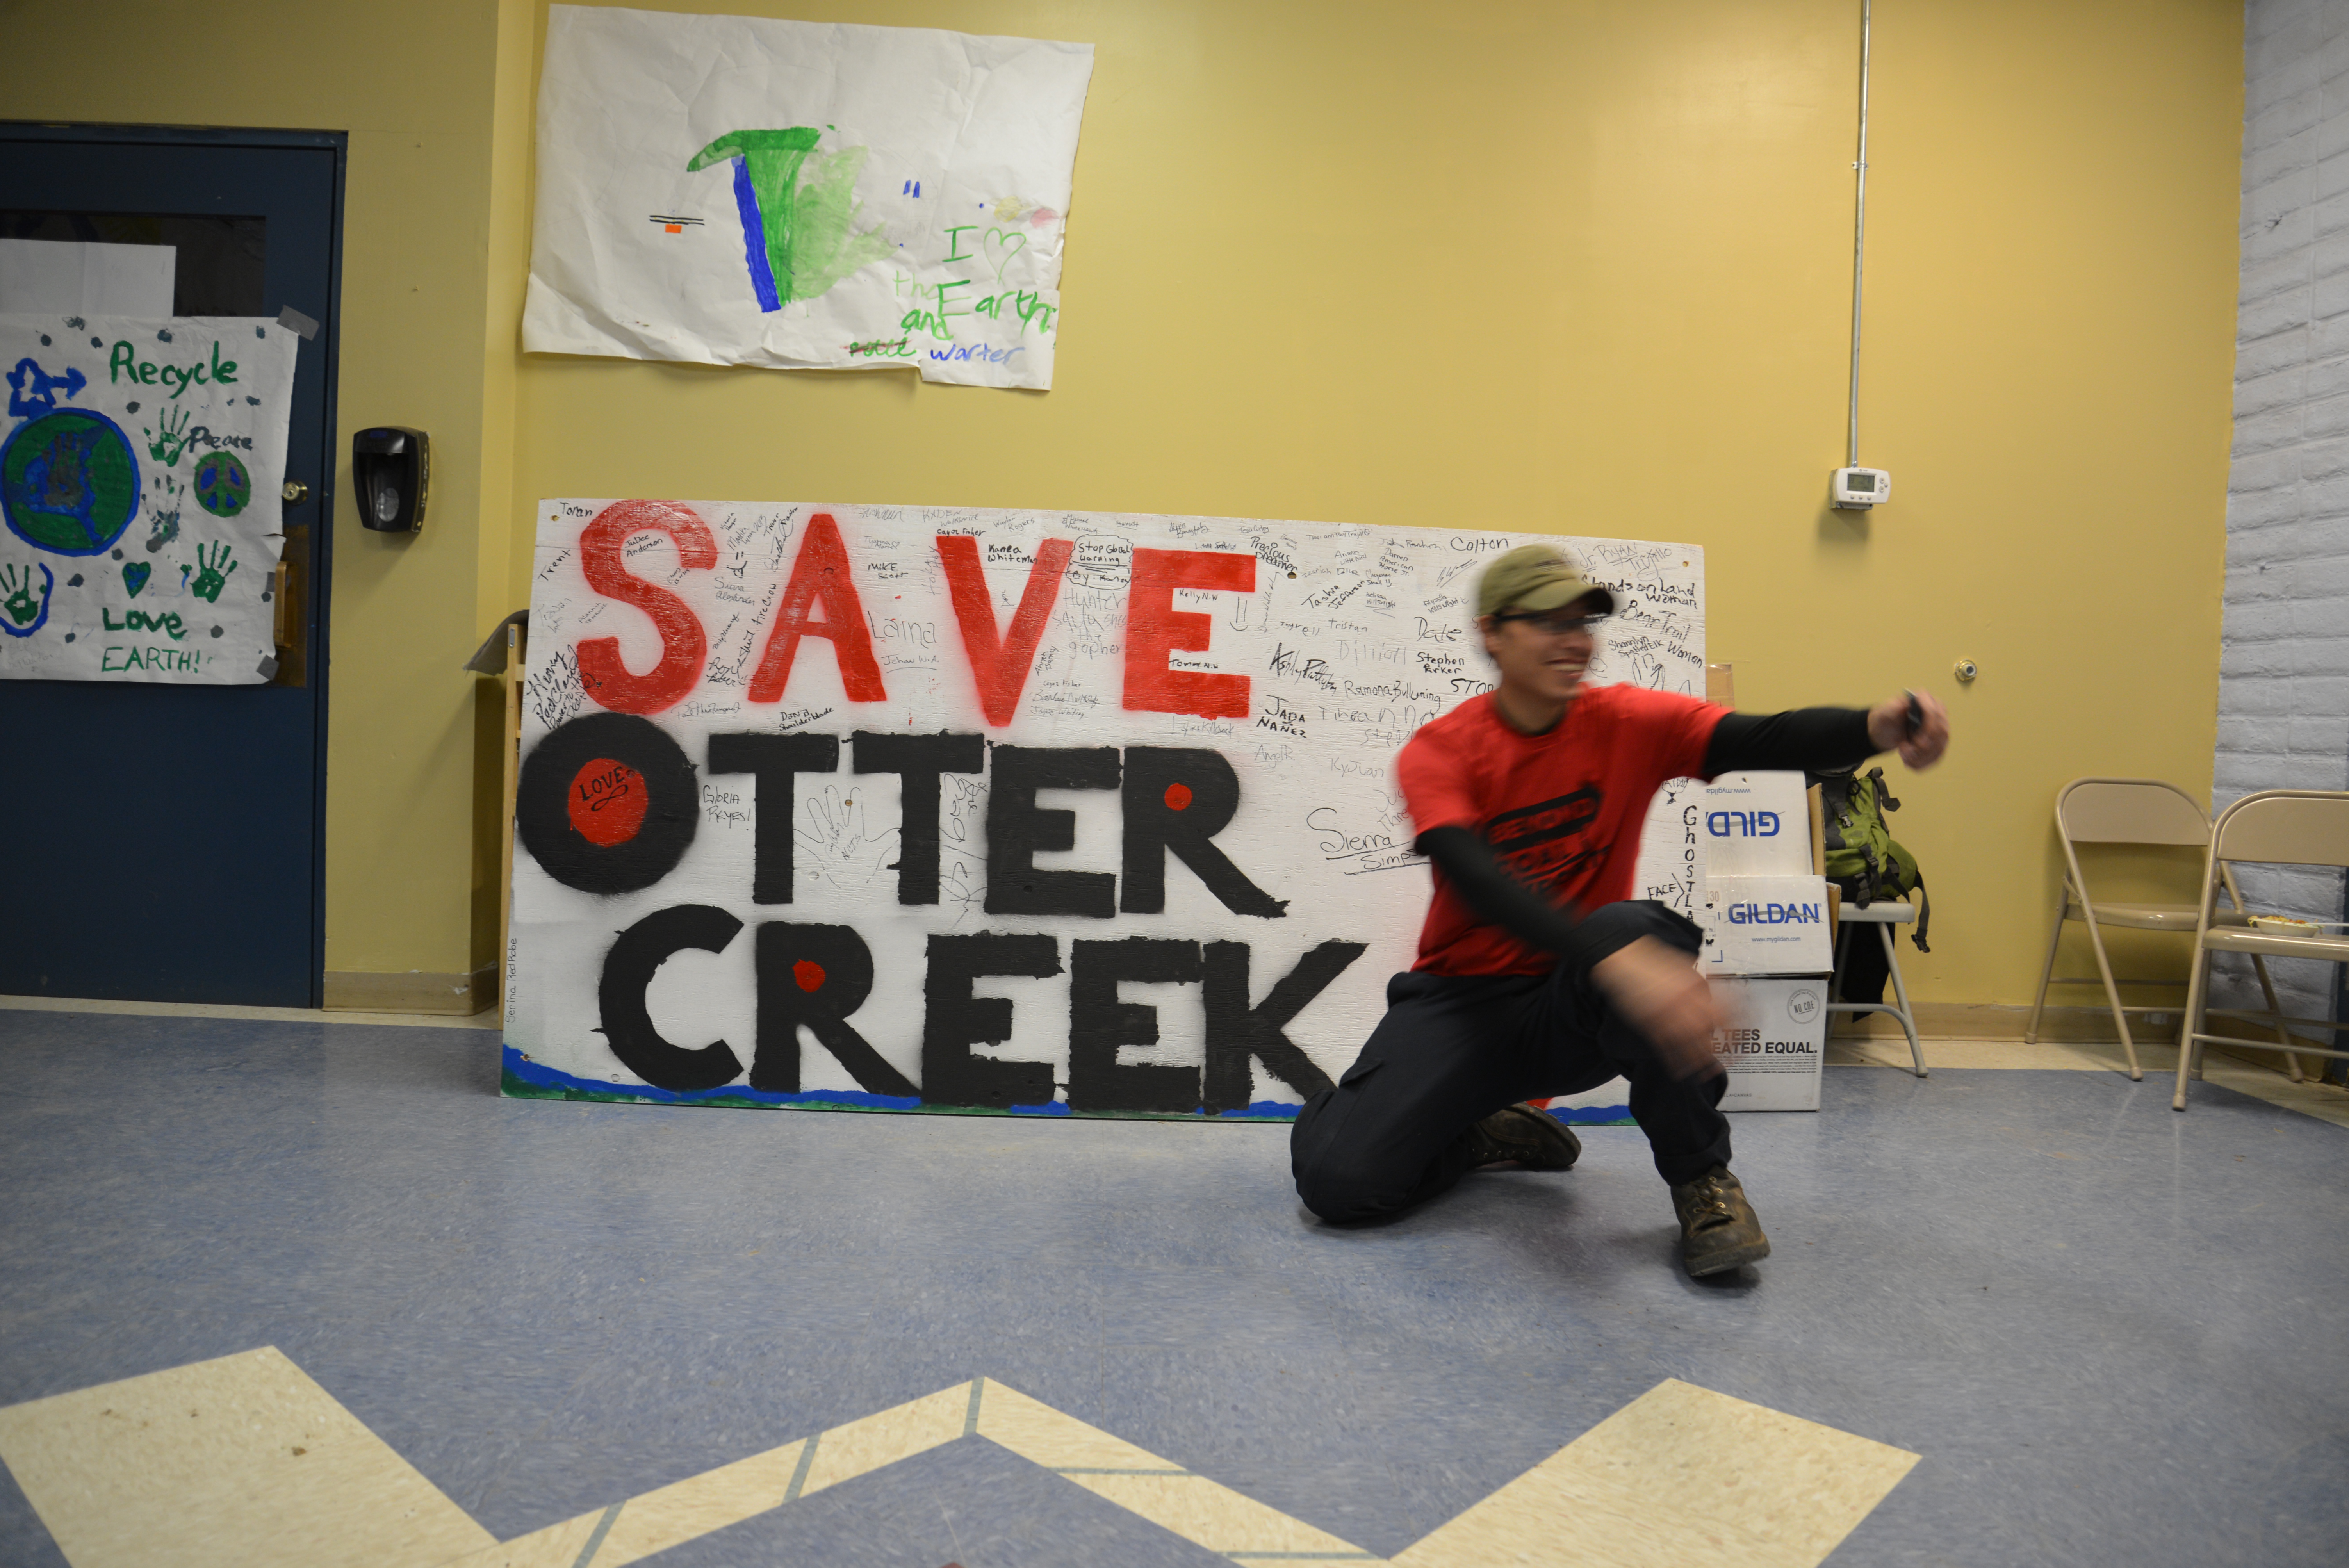 Kaden Walksnice getting signatures on the Save Otter Creek sign